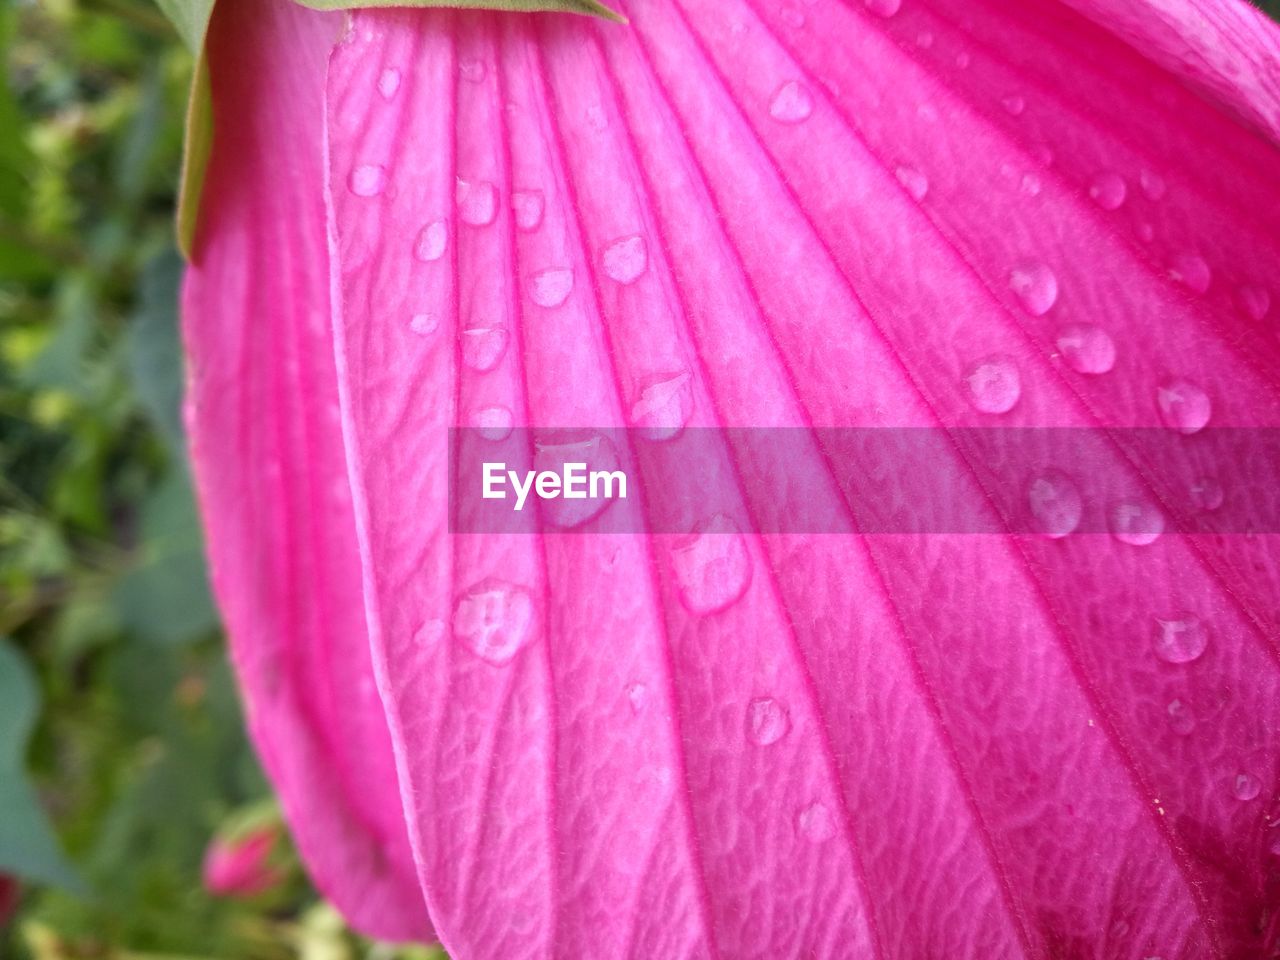 CLOSE-UP OF WATER DROPS ON PINK FLOWER